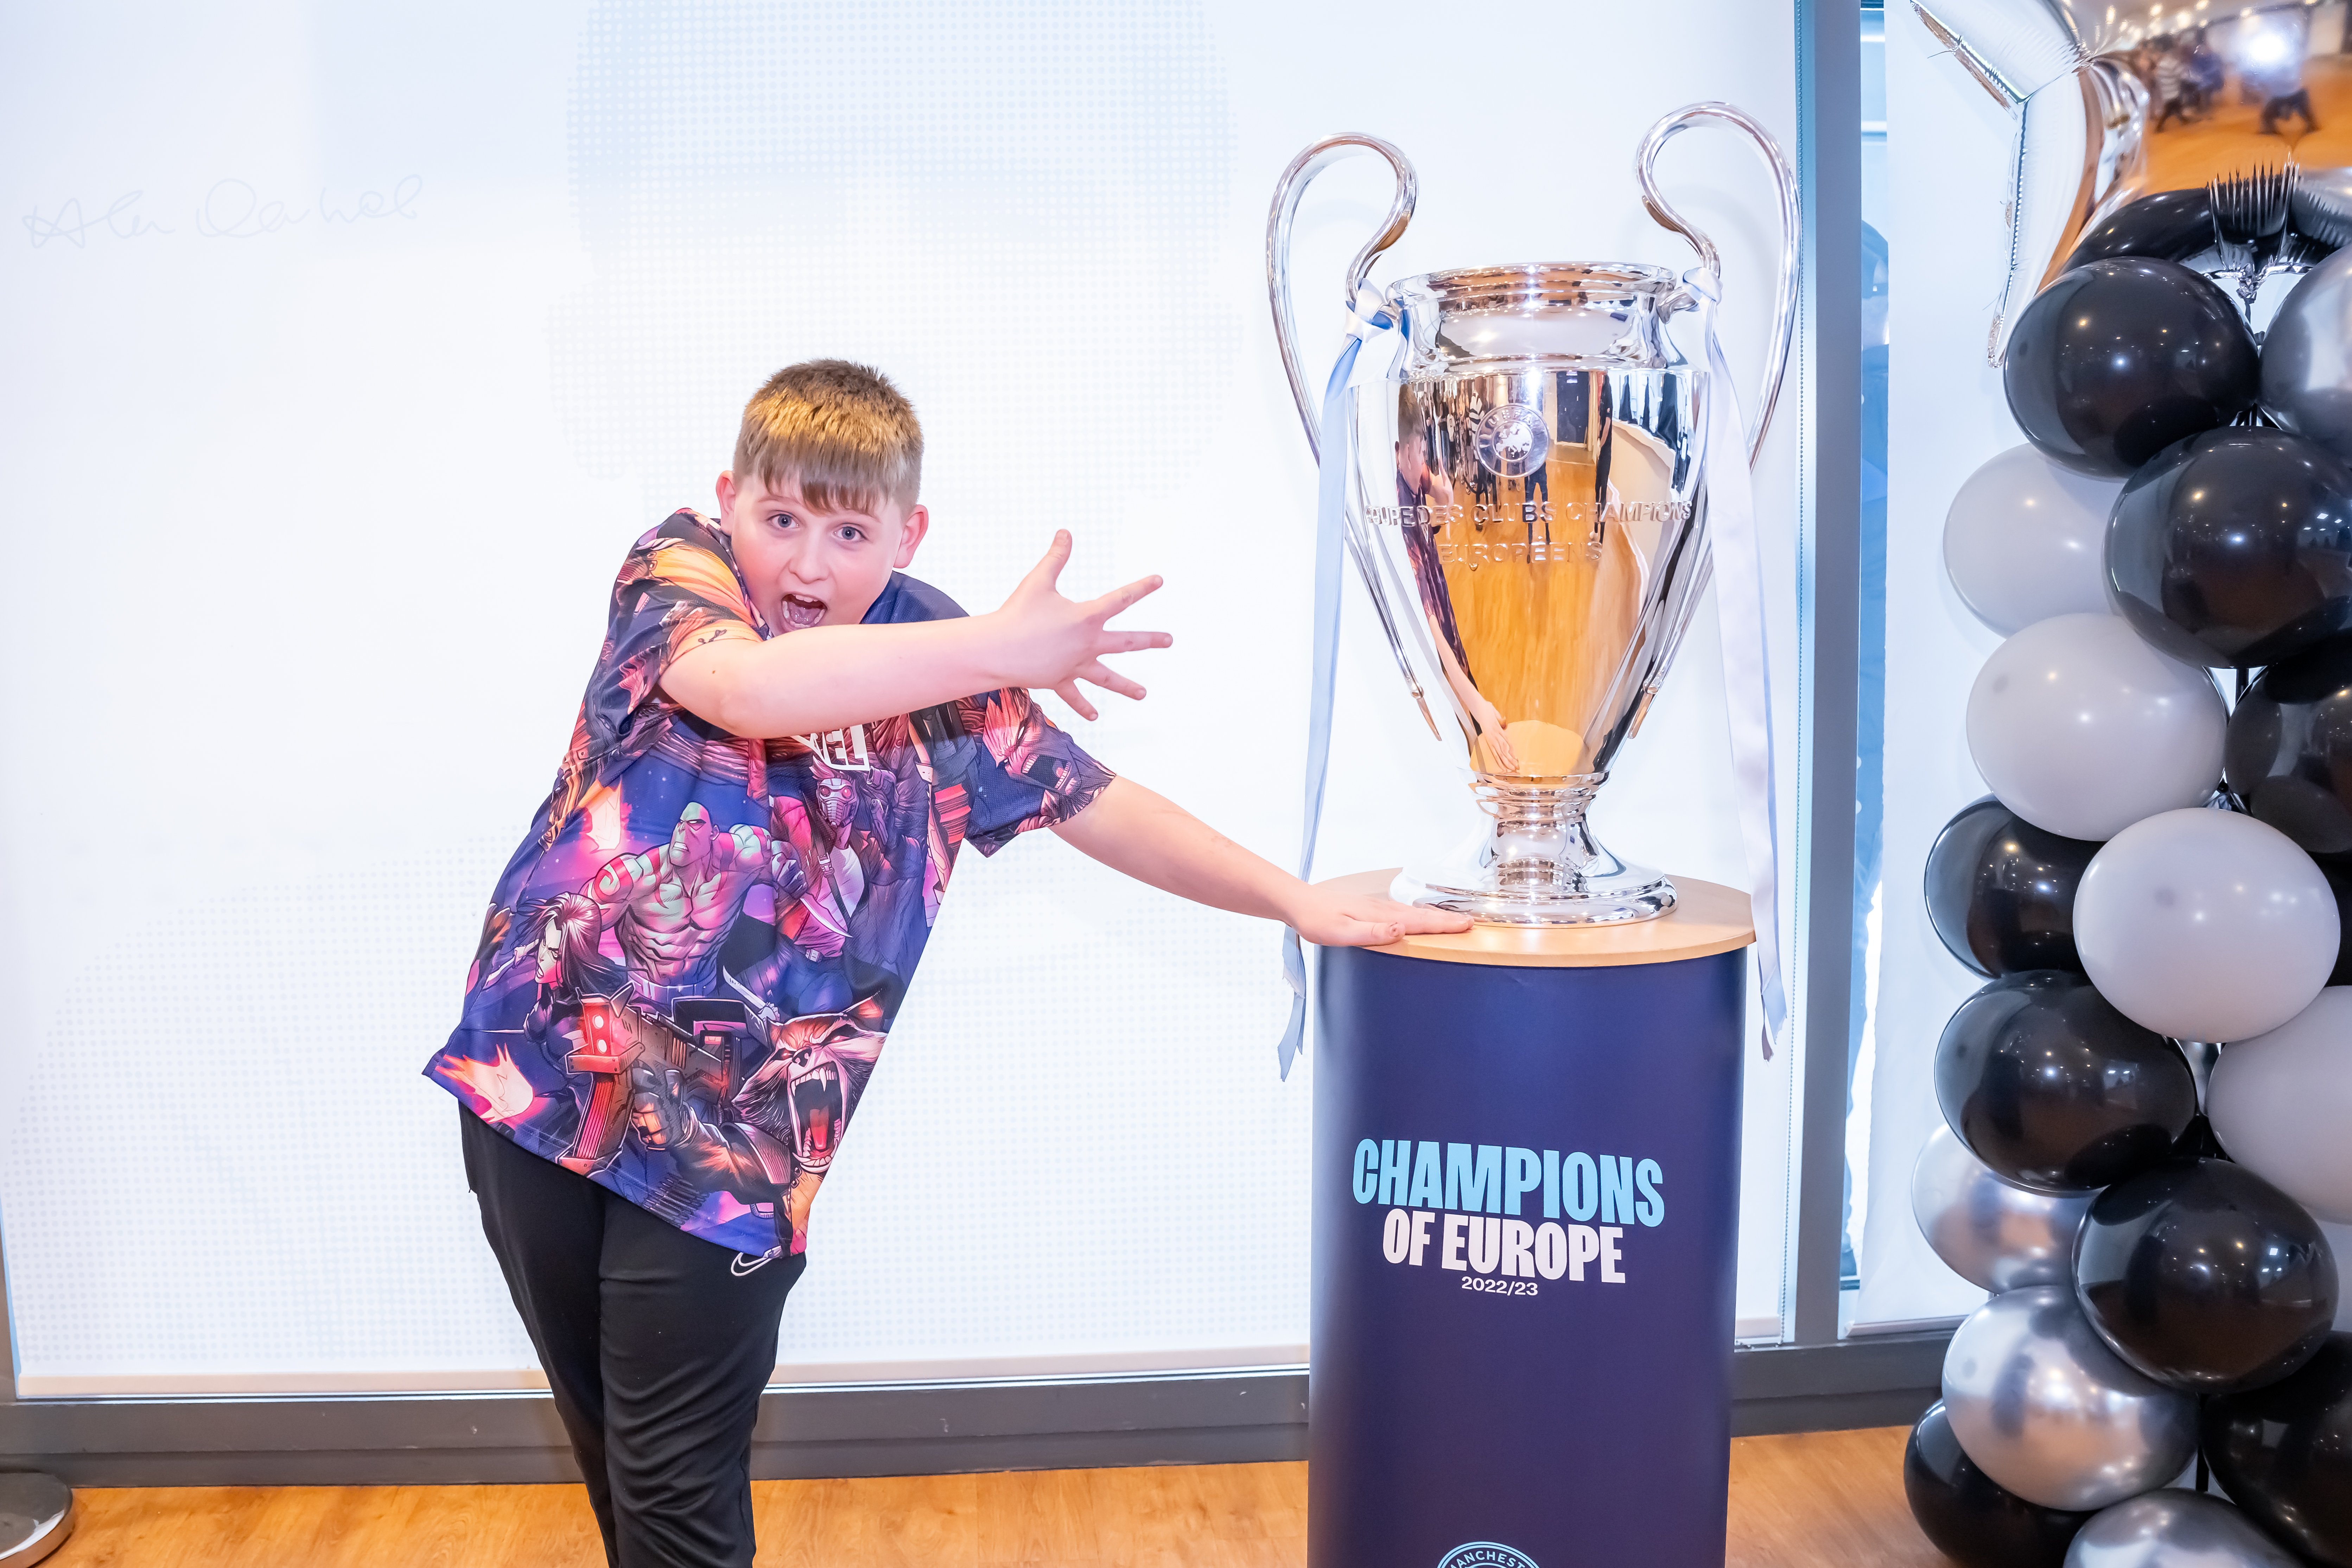 A young boy showing excitement and wide smile next to Manchester City’s Champions of Europe Cup 2022/23